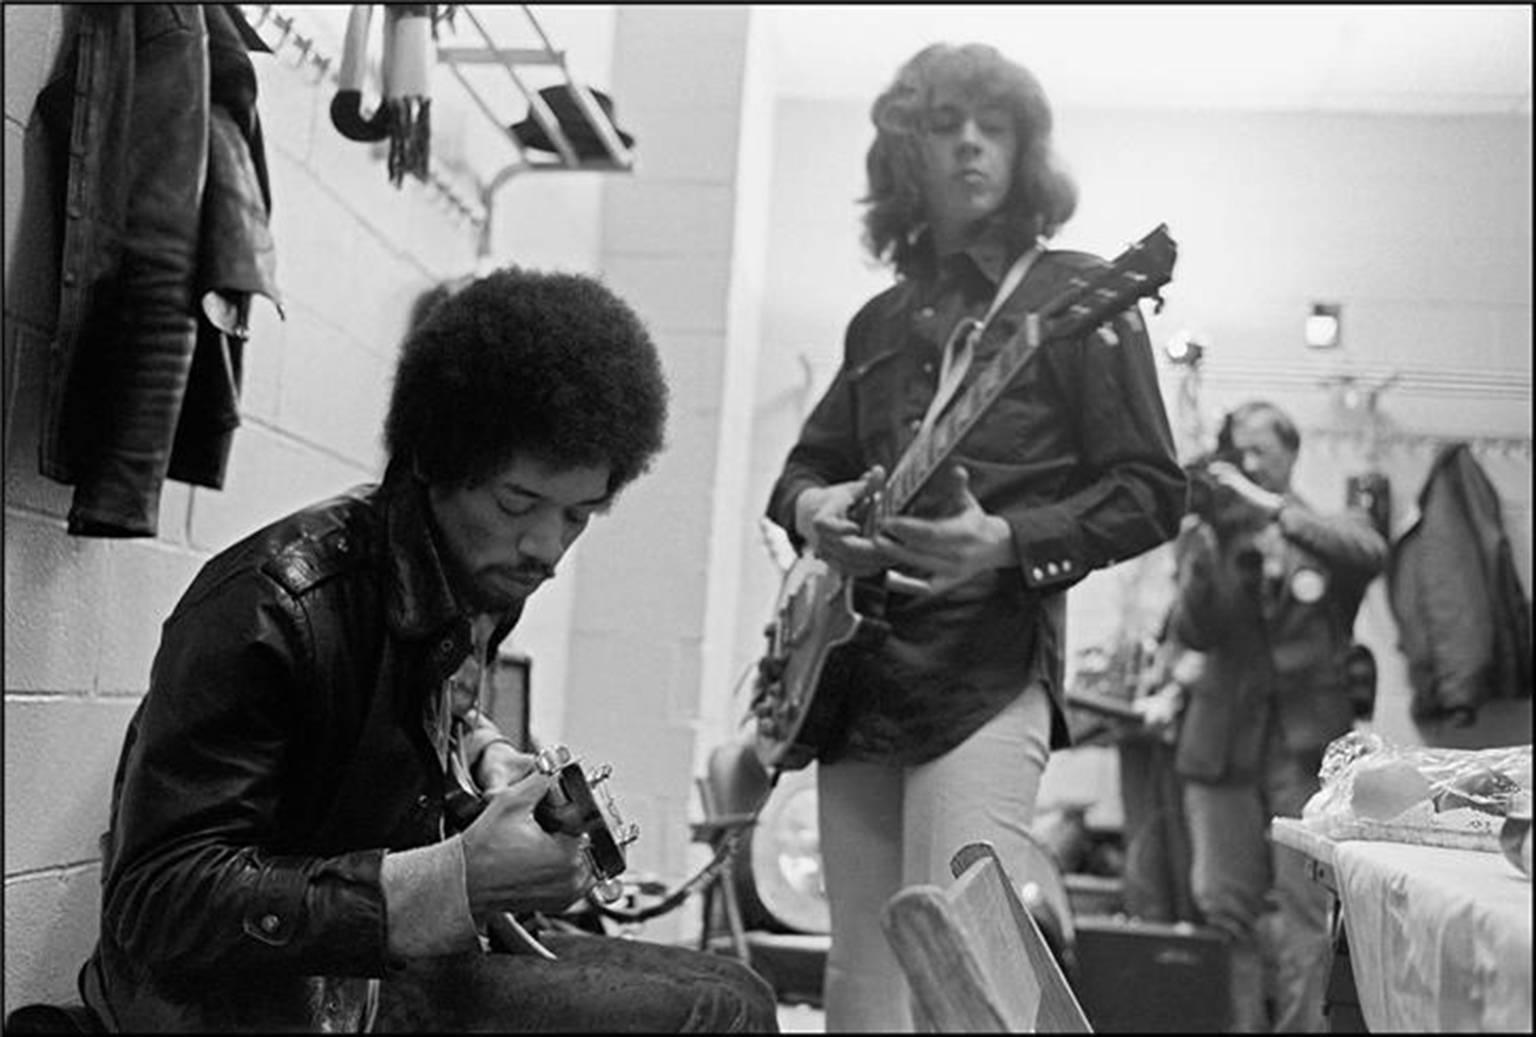 Ethan Russell Black and White Photograph - Jimi Hendrix and Mick Taylor, New York, NY 1969